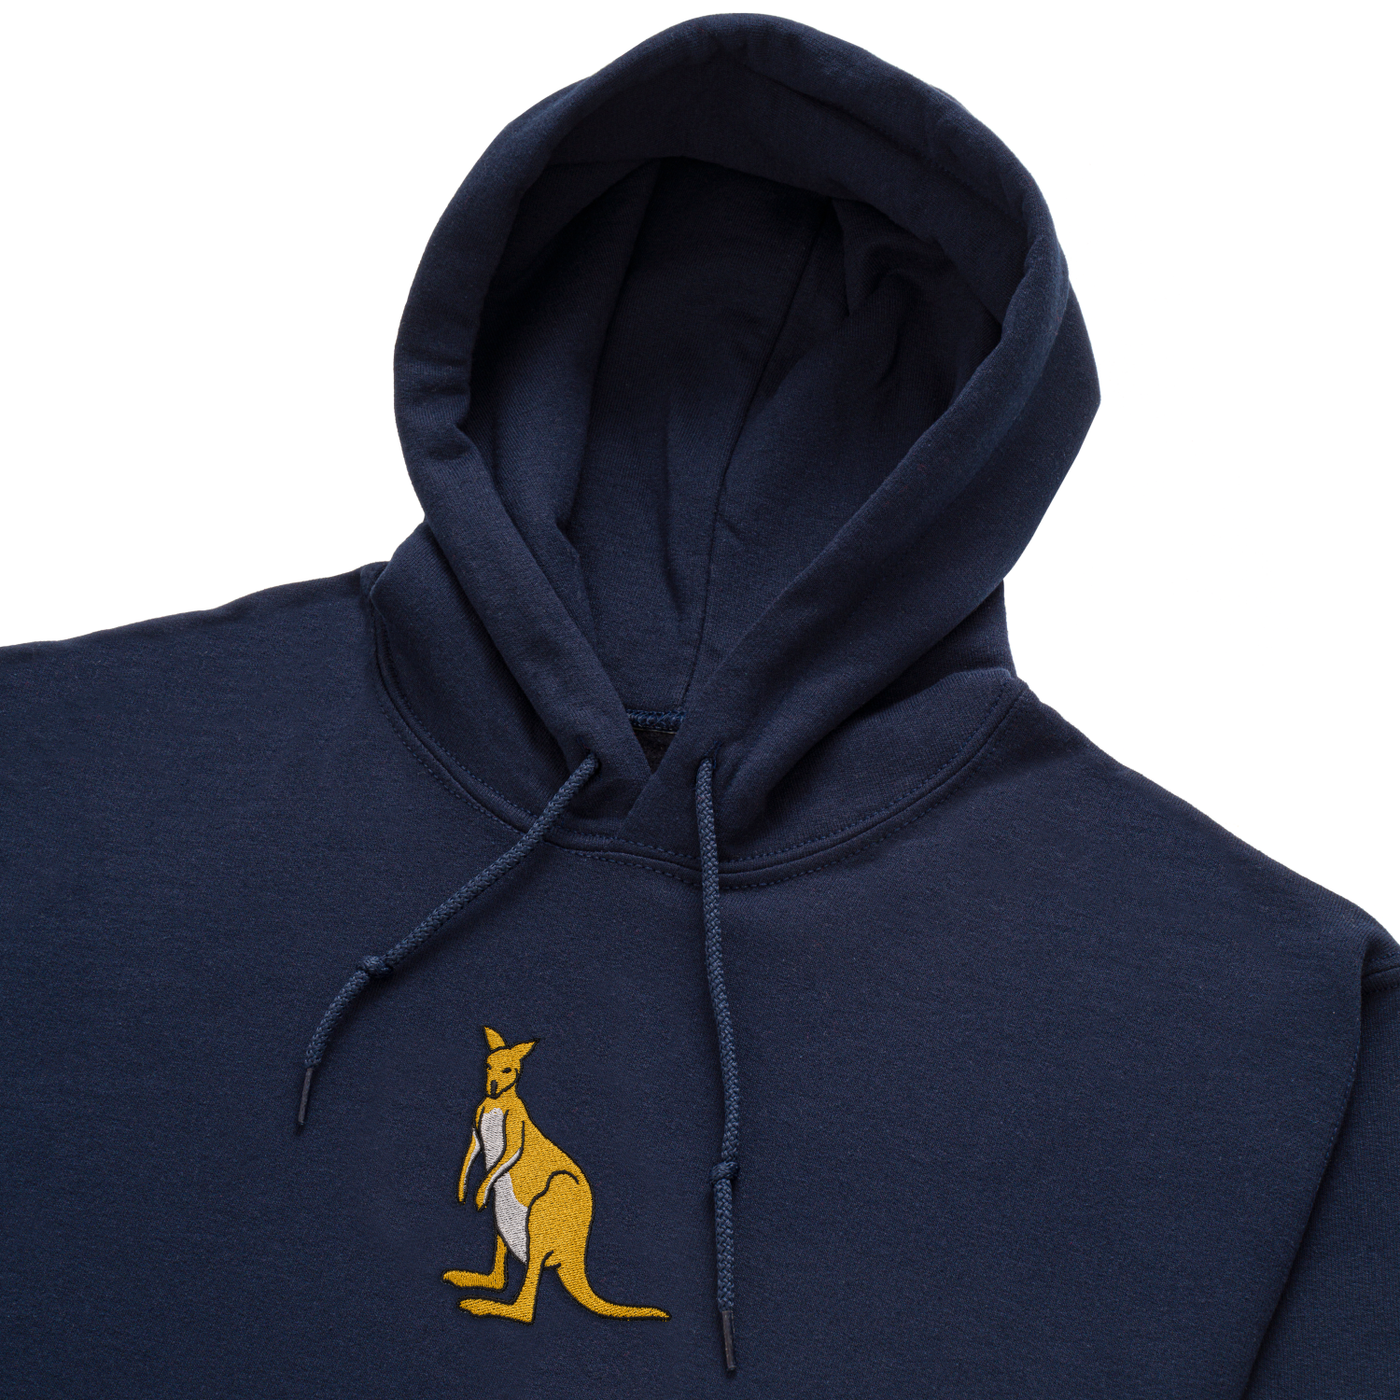 Bobby's Planet Men's Embroidered Kangaroo Hoodie from Australia Down Under Animals Collection in Navy Color#color_navy